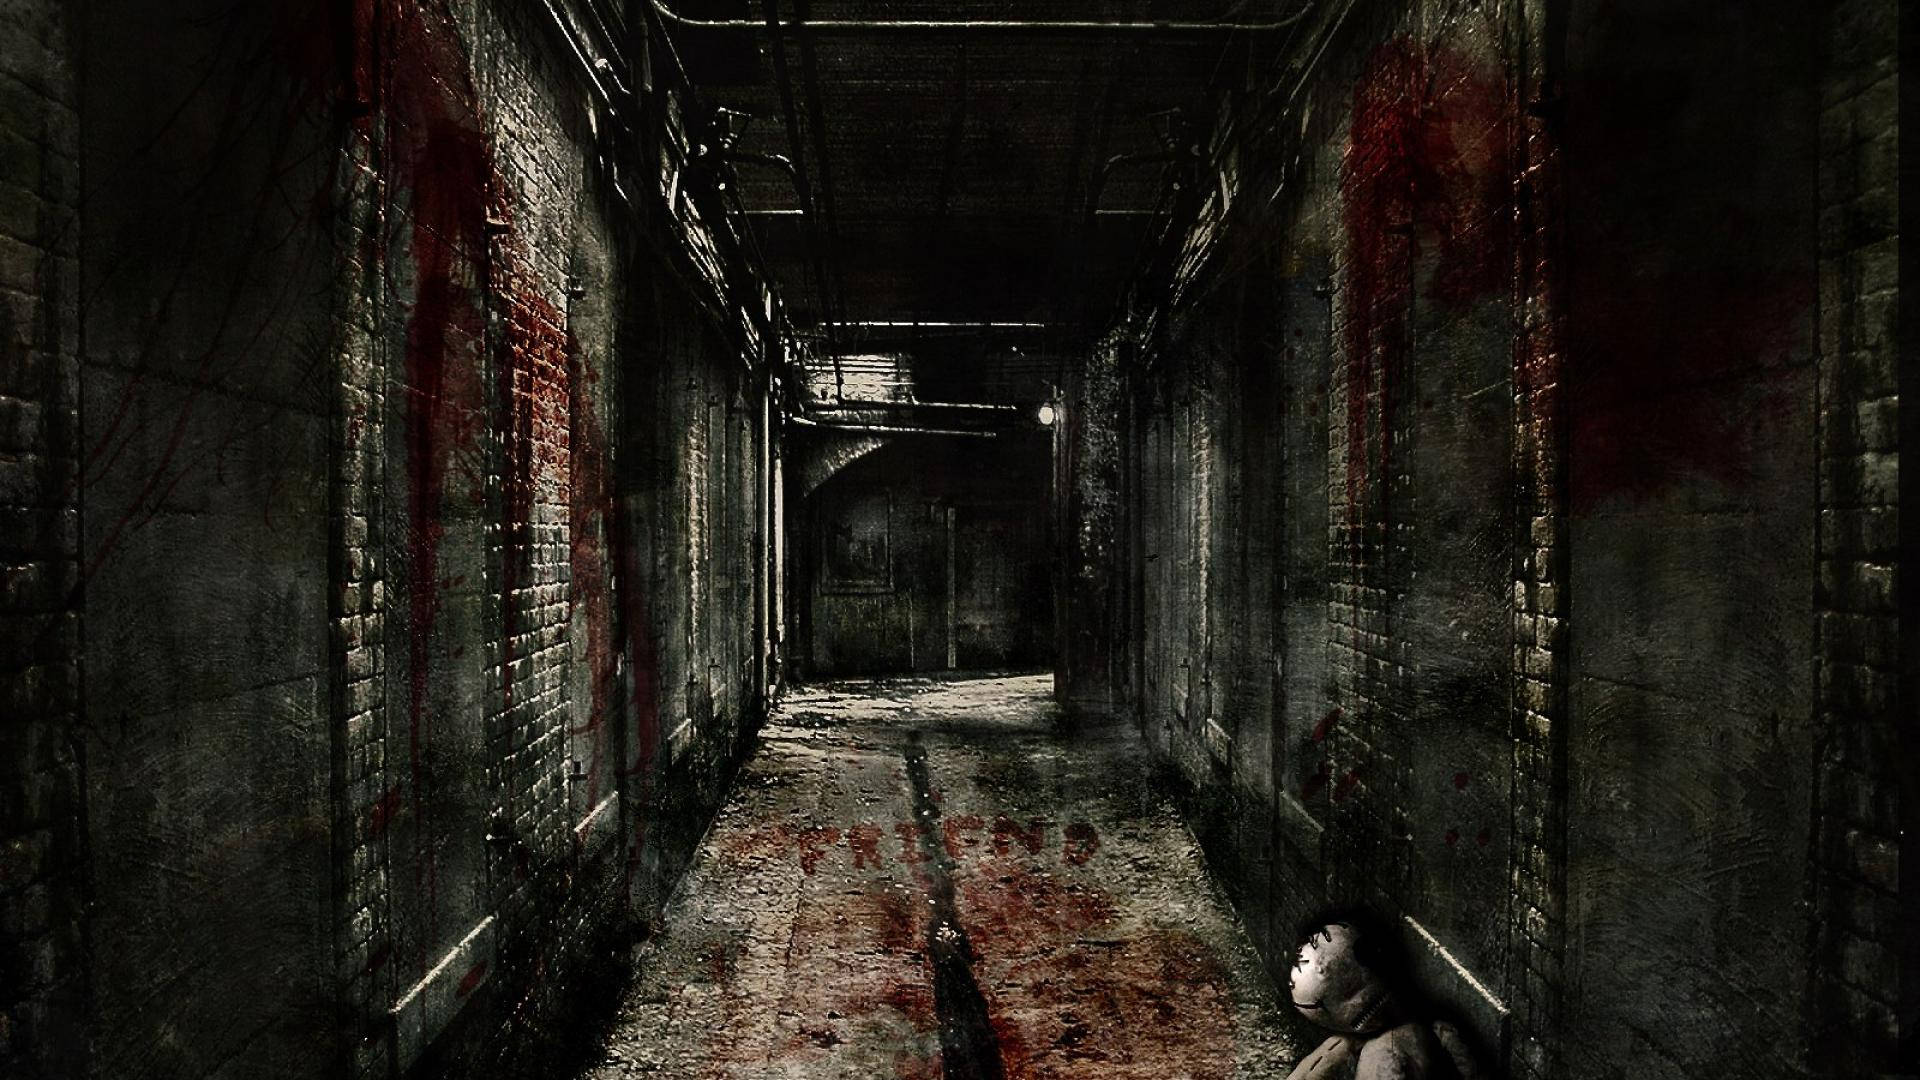 Spooky and eerie, this dark horror scene will give you chills Wallpaper